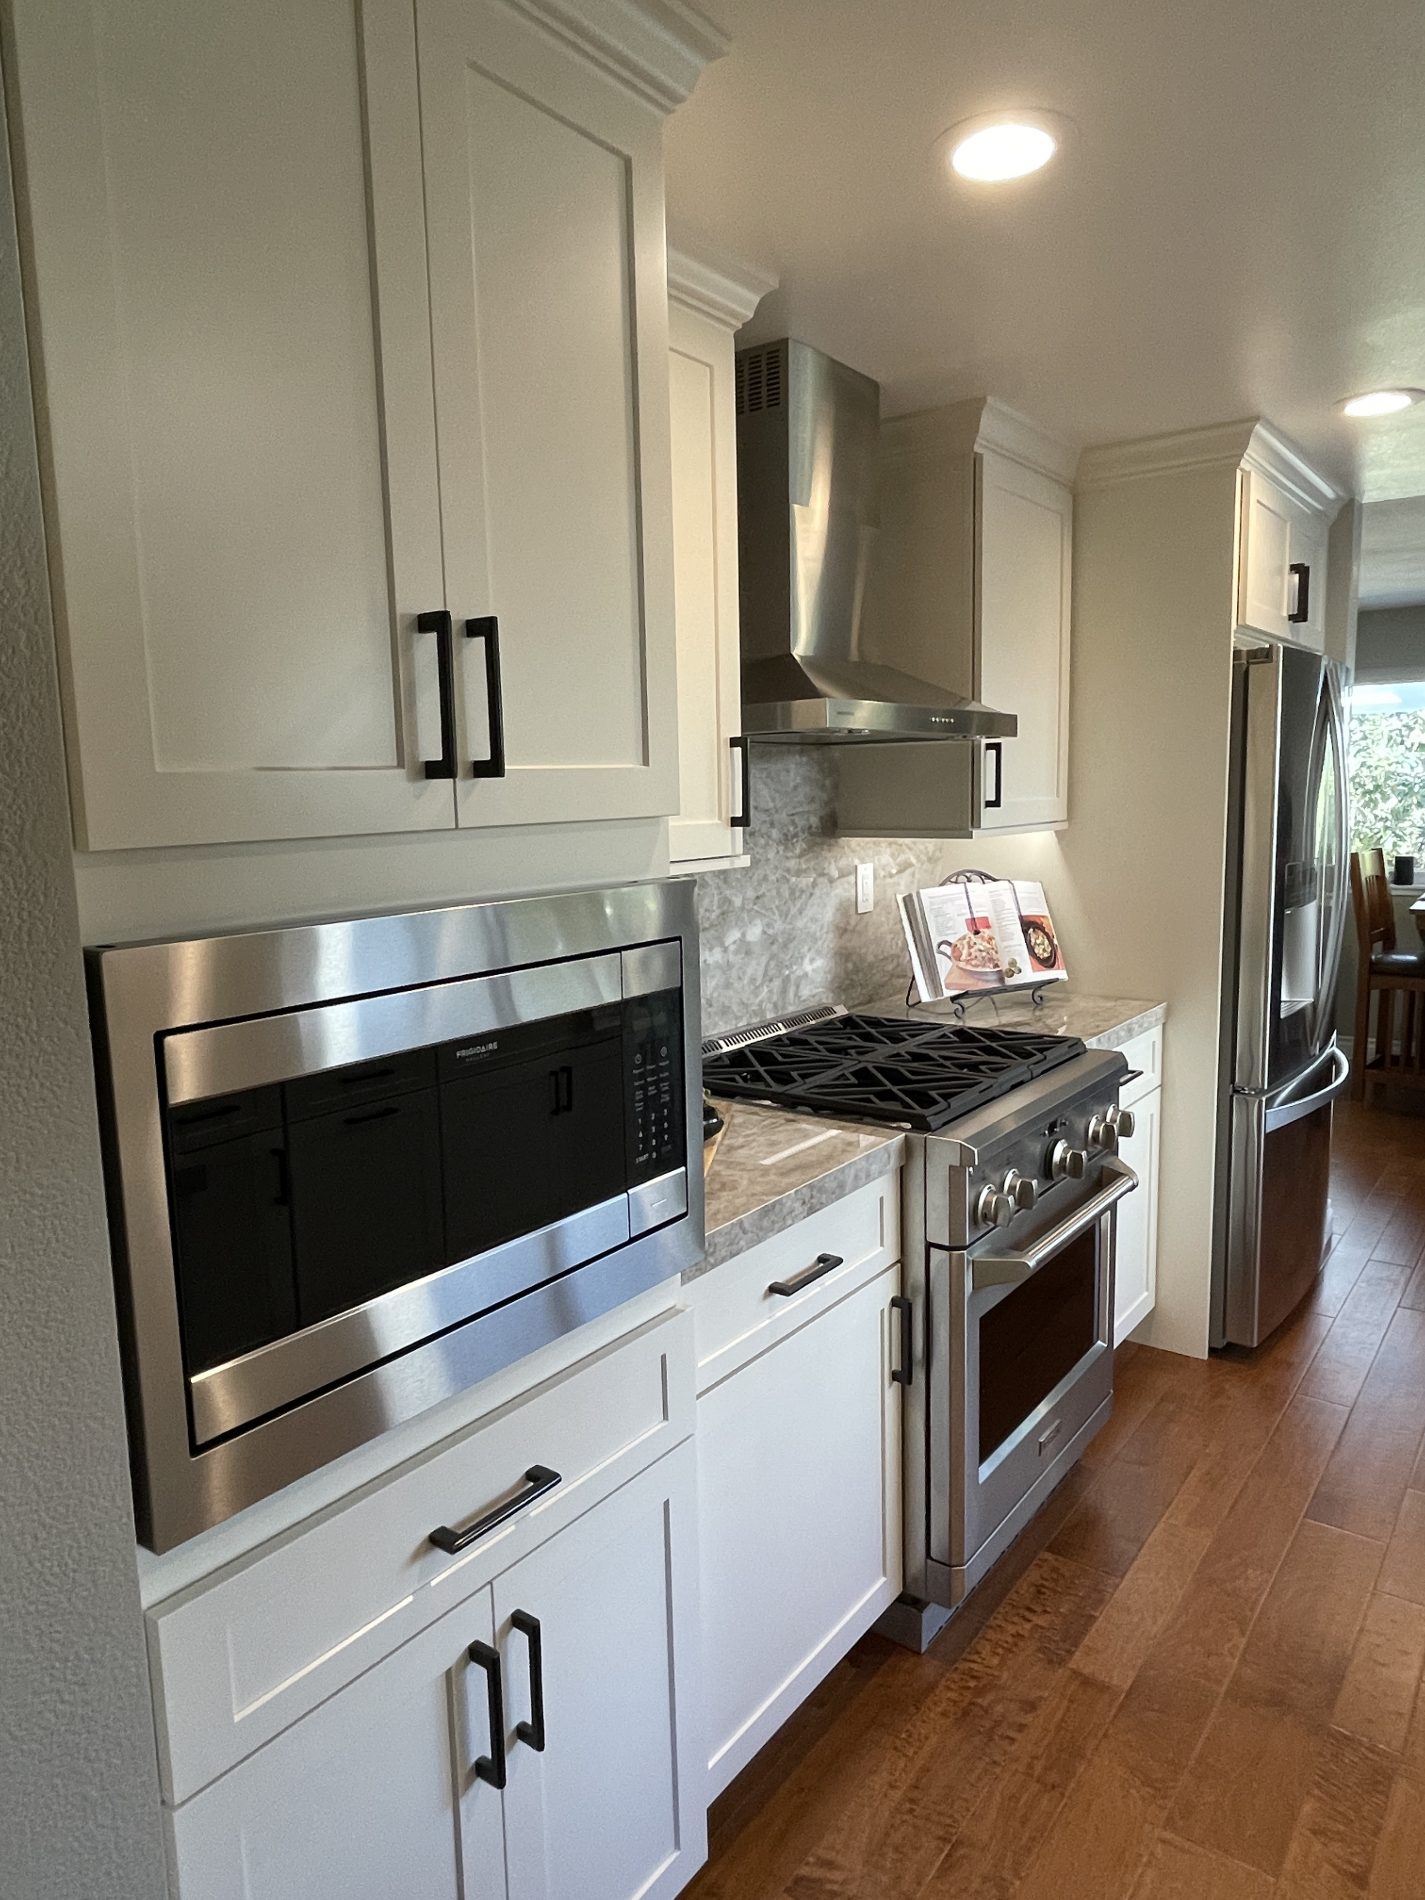 Seneca contemporary galley kitchen with white cabinets, stone counter and backsplash, stainless appliances, wood laminate floor.